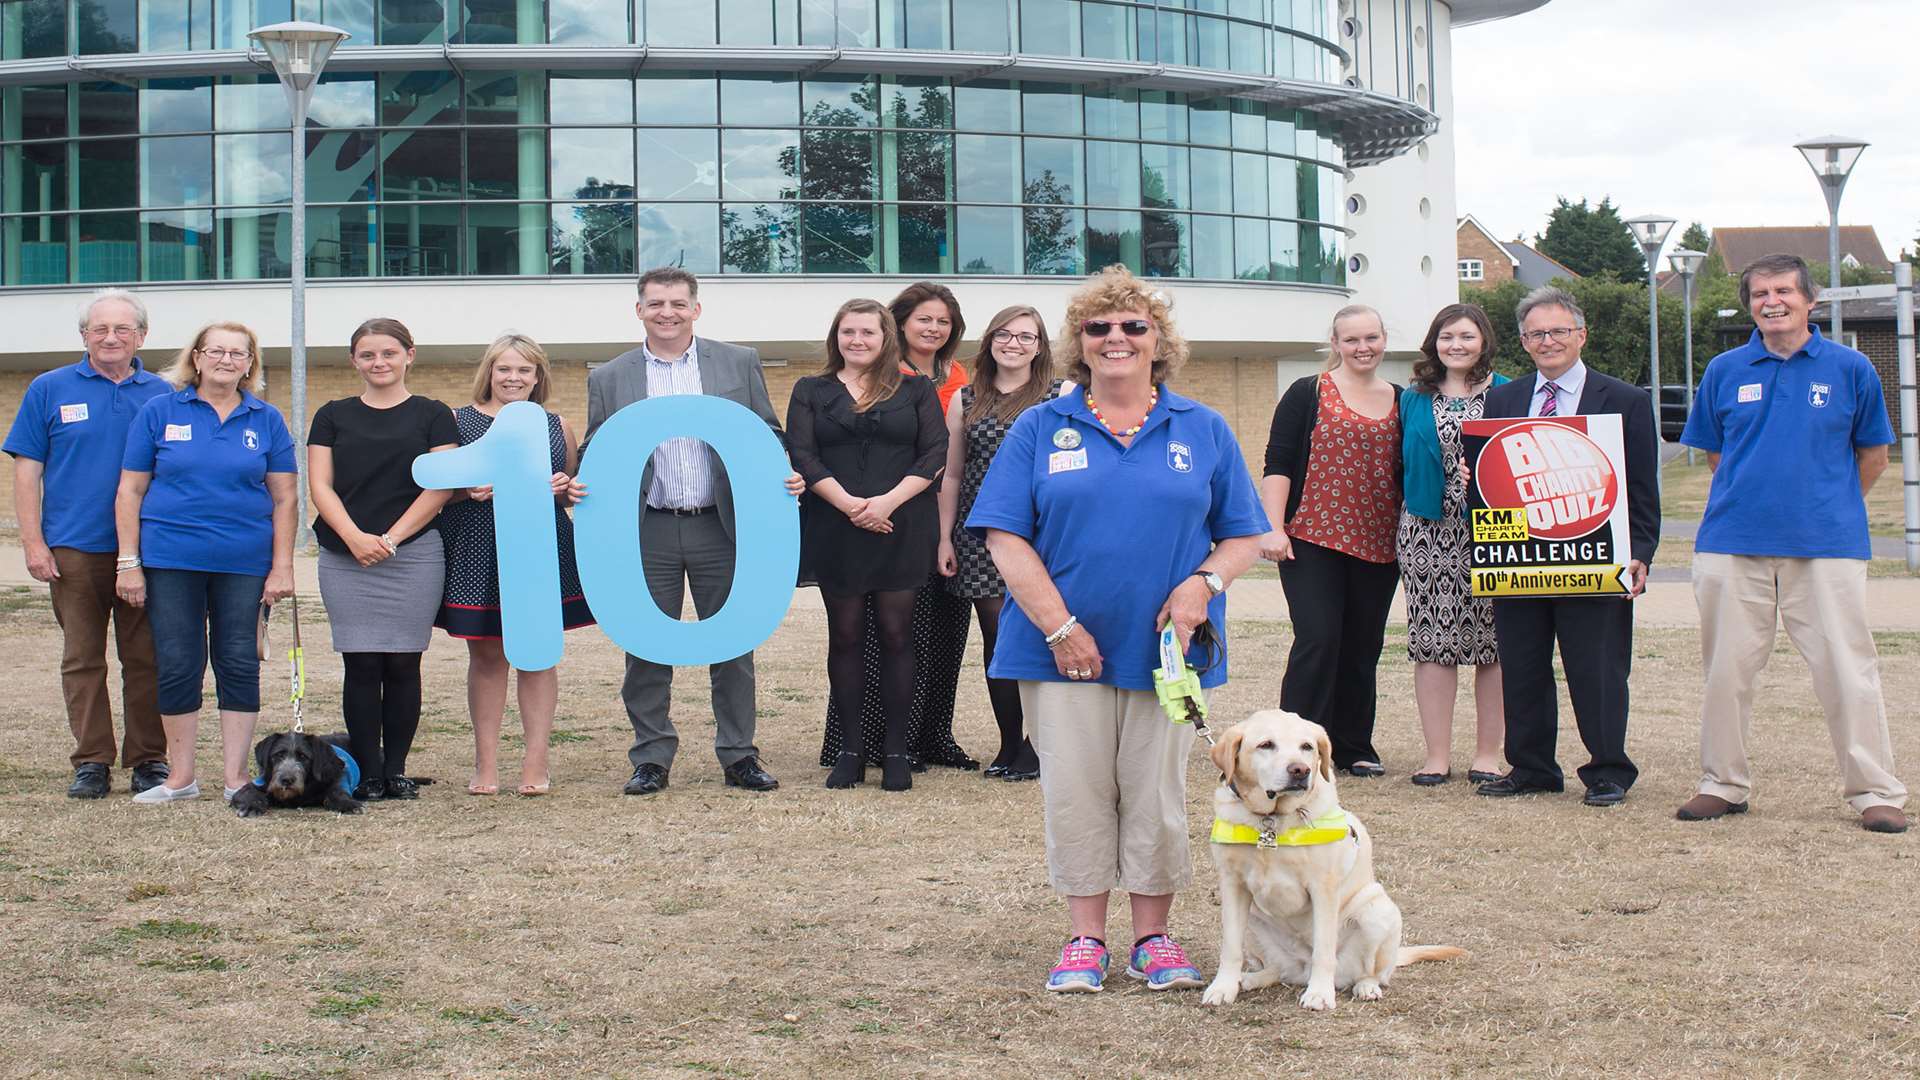 Pat Marshall (front) with guide dog Chloe and partners of the 10th anniversary KM Big Quiz HR GO, Hallett and Co and Specsavers.